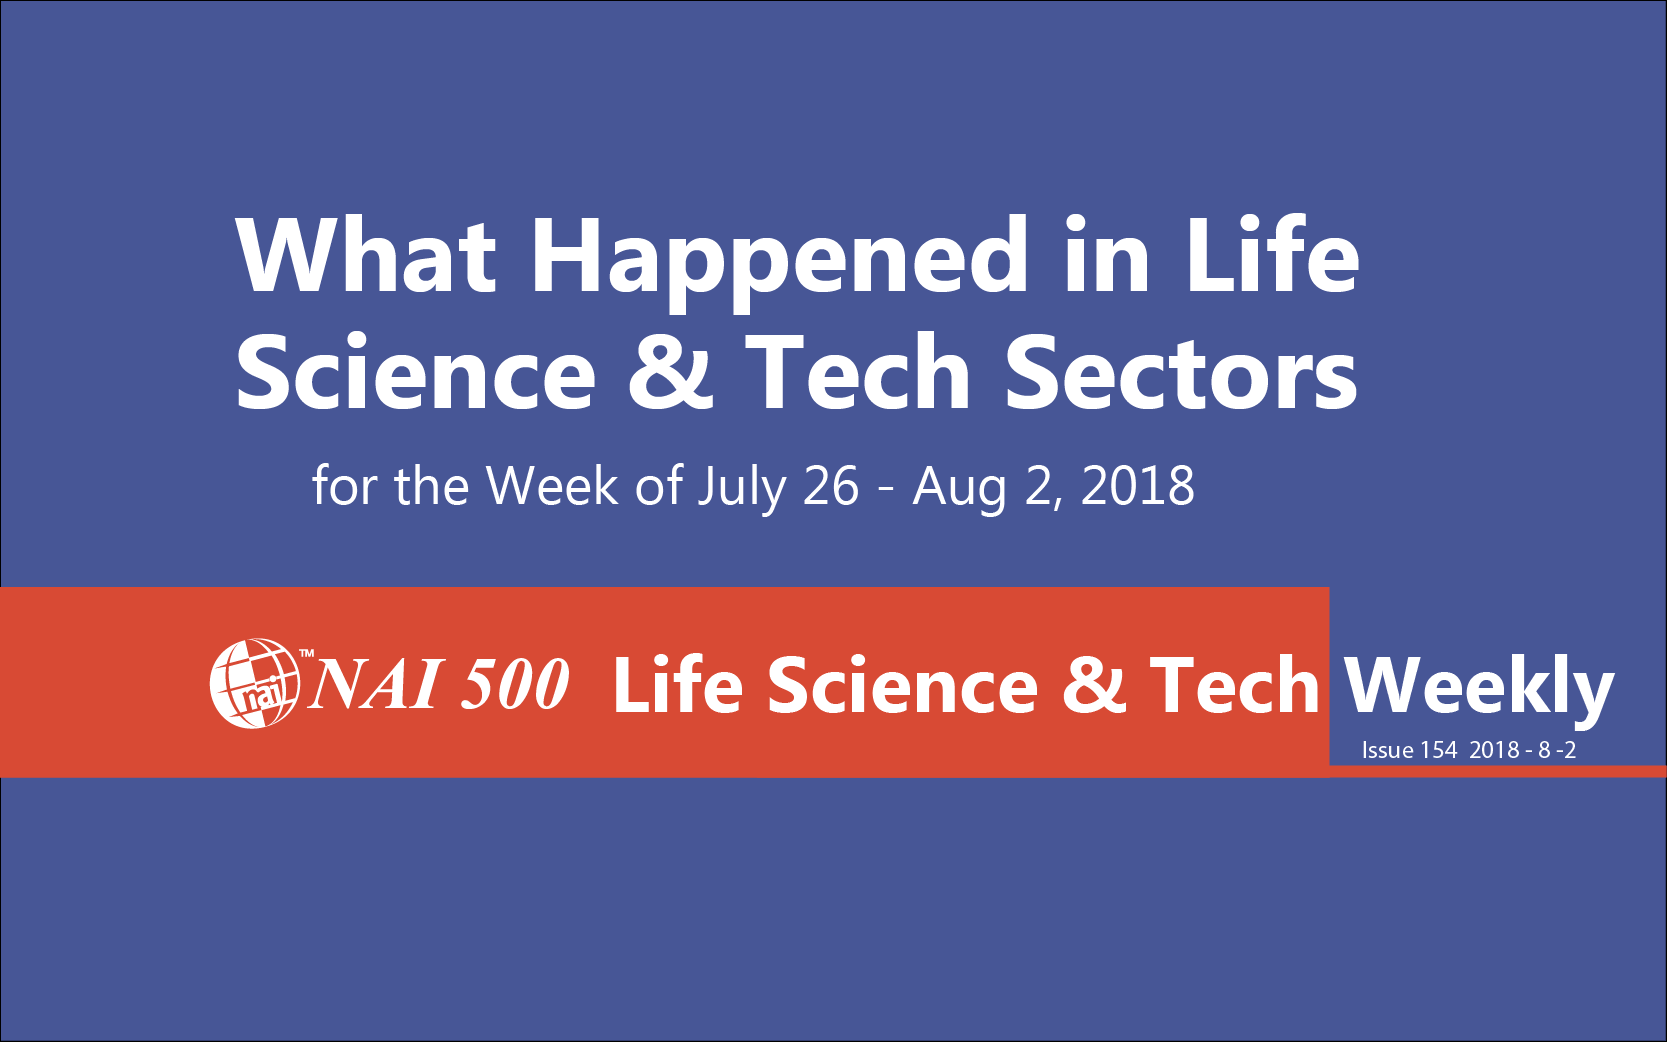 Life Science & Technology Weekly 154 Manulife launches Canada’s first